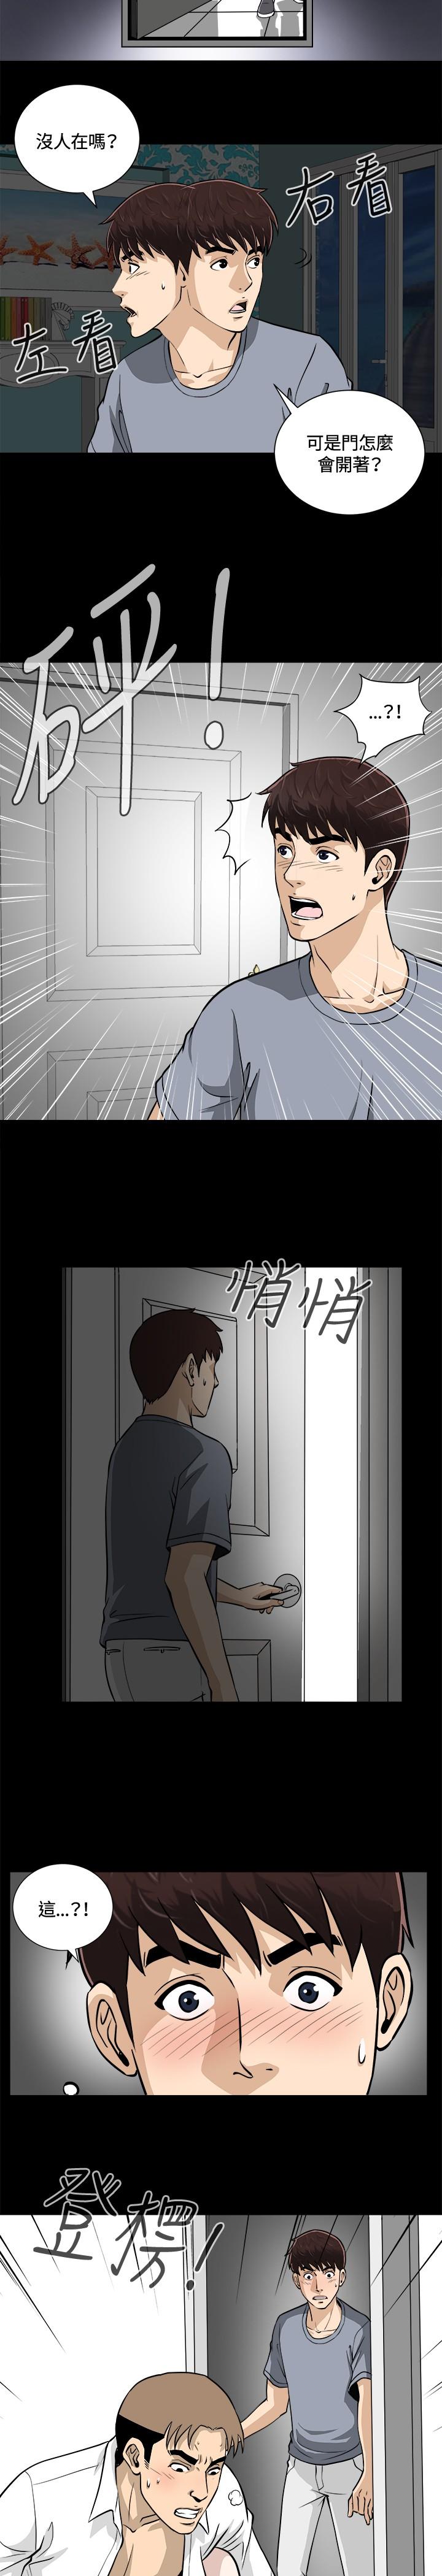 Moaning Dangerous game 危险性游戏 Ch.11 Alt - Page 9